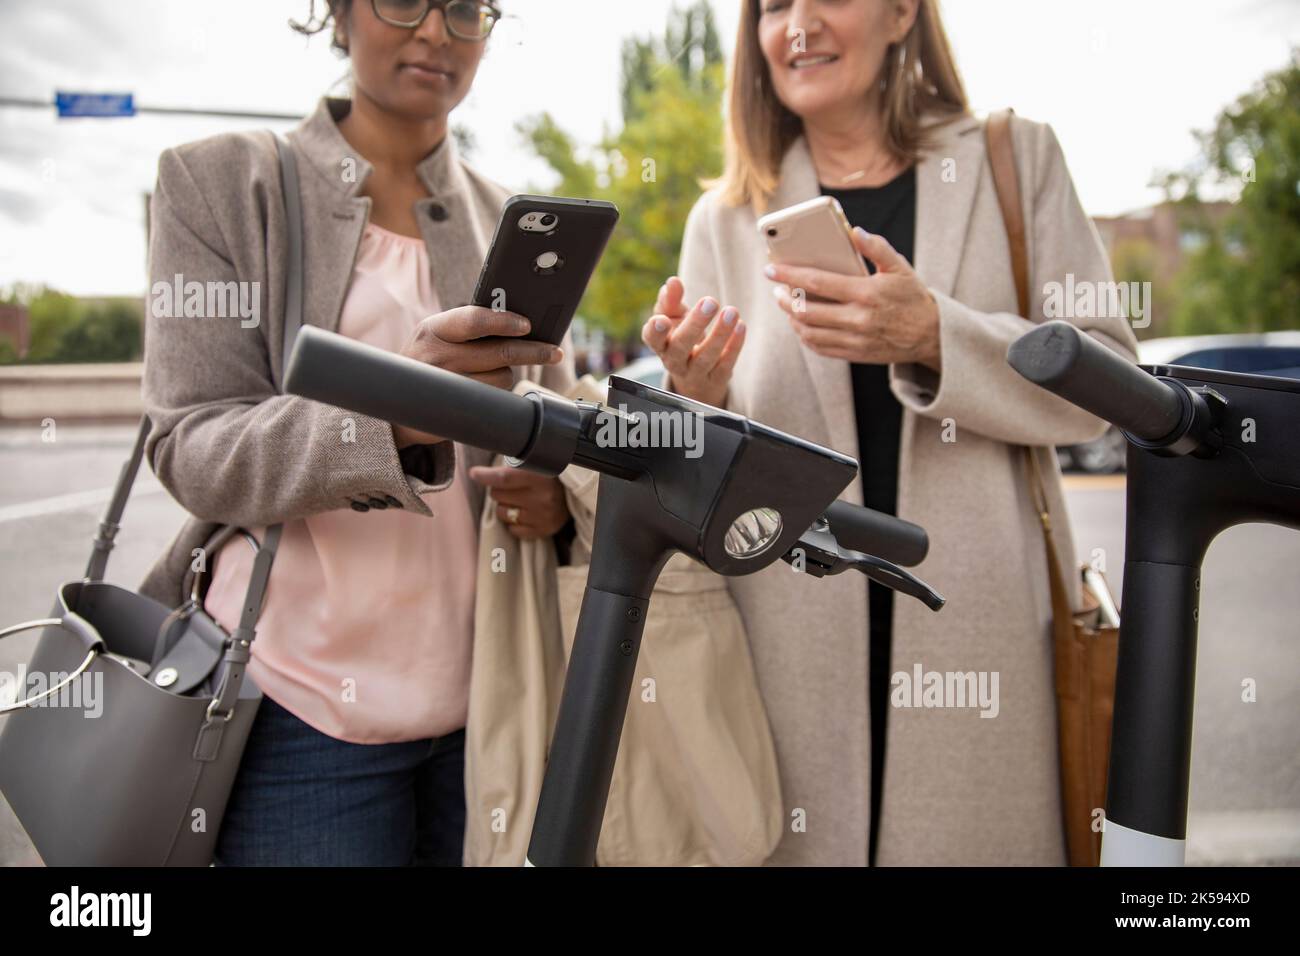 Businesswomen with smart phones renting public scooters Stock Photo